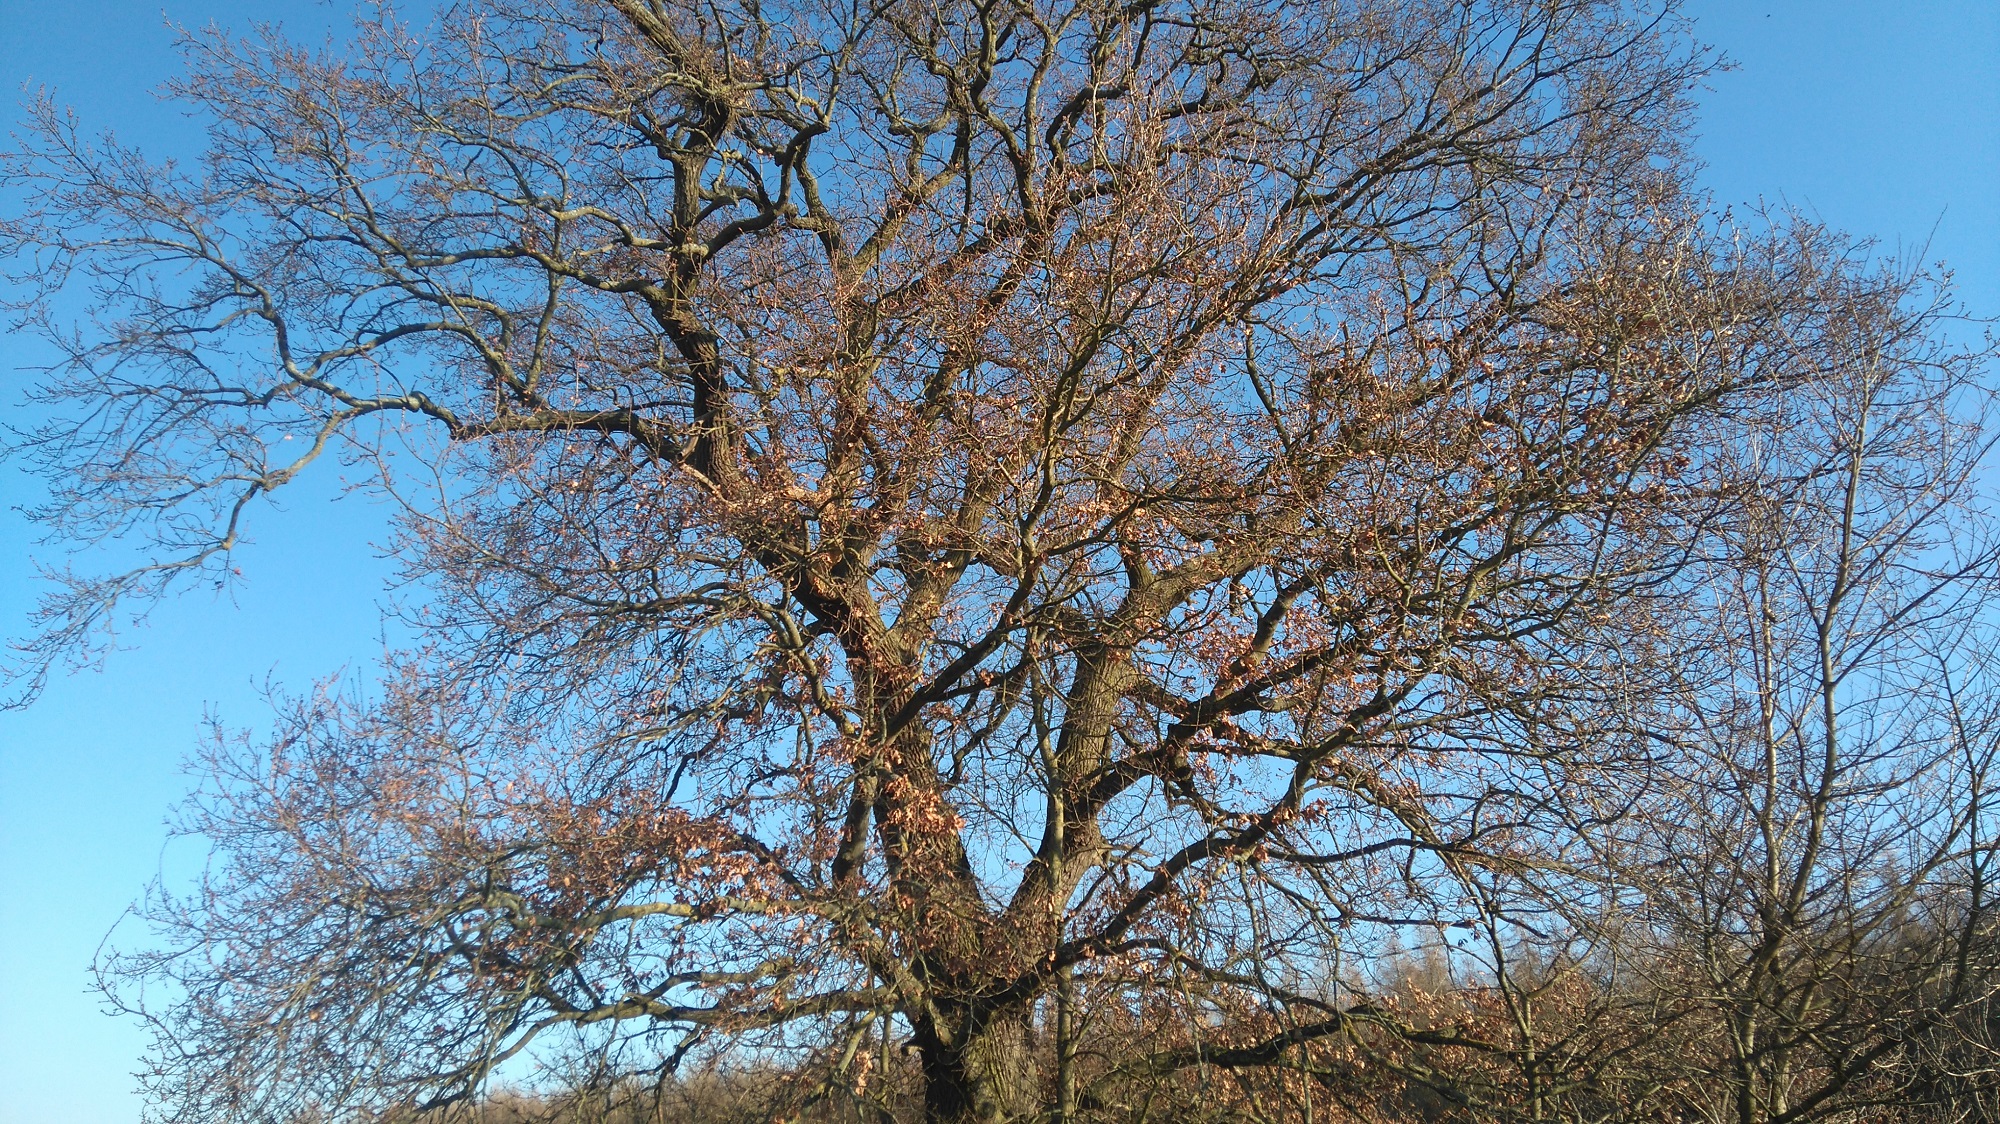 A bare wintry deciduous tree is bathed in sunshine under a blue sky.